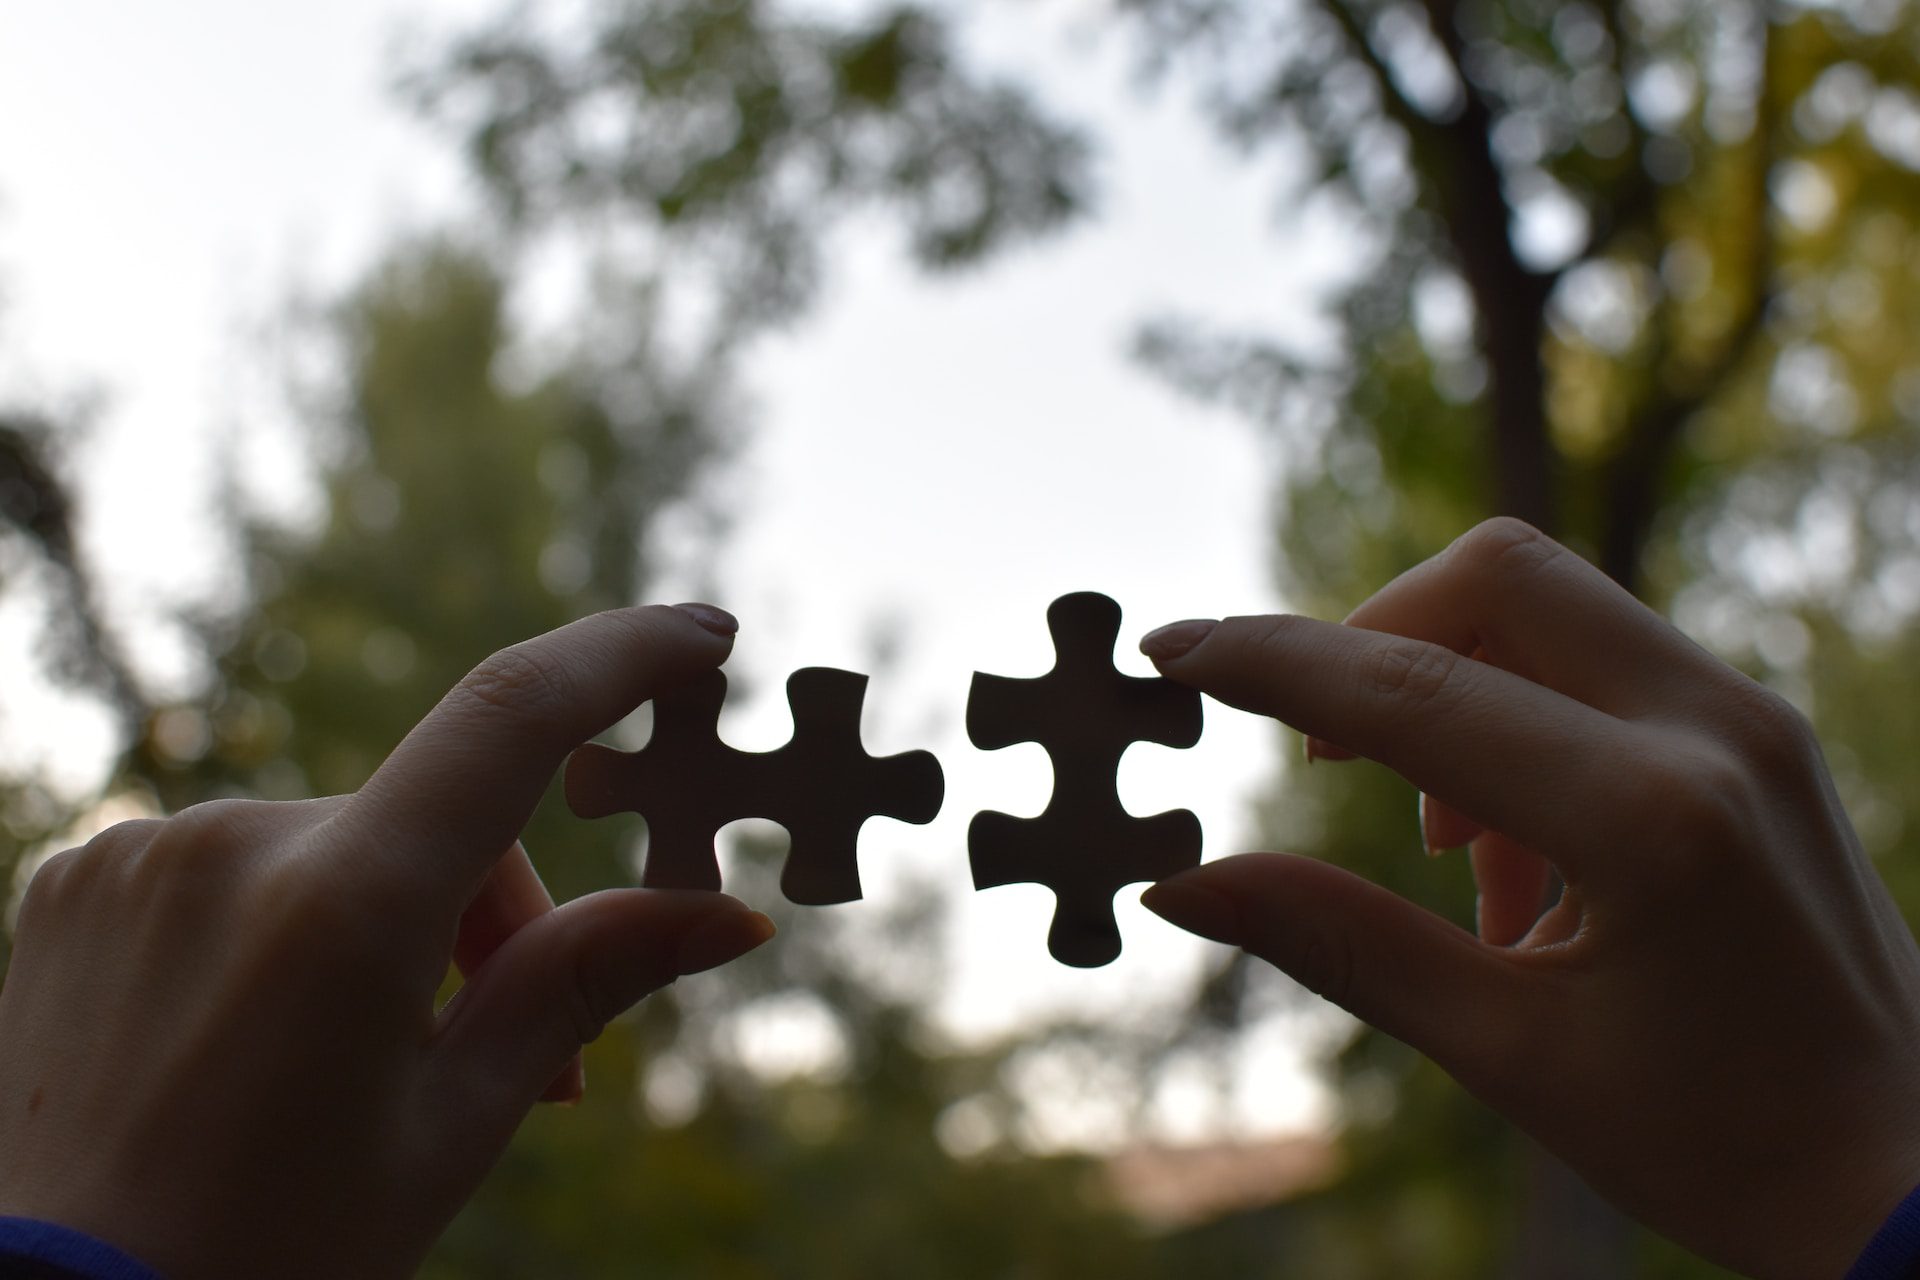 Hands fitting together puzzle pieces